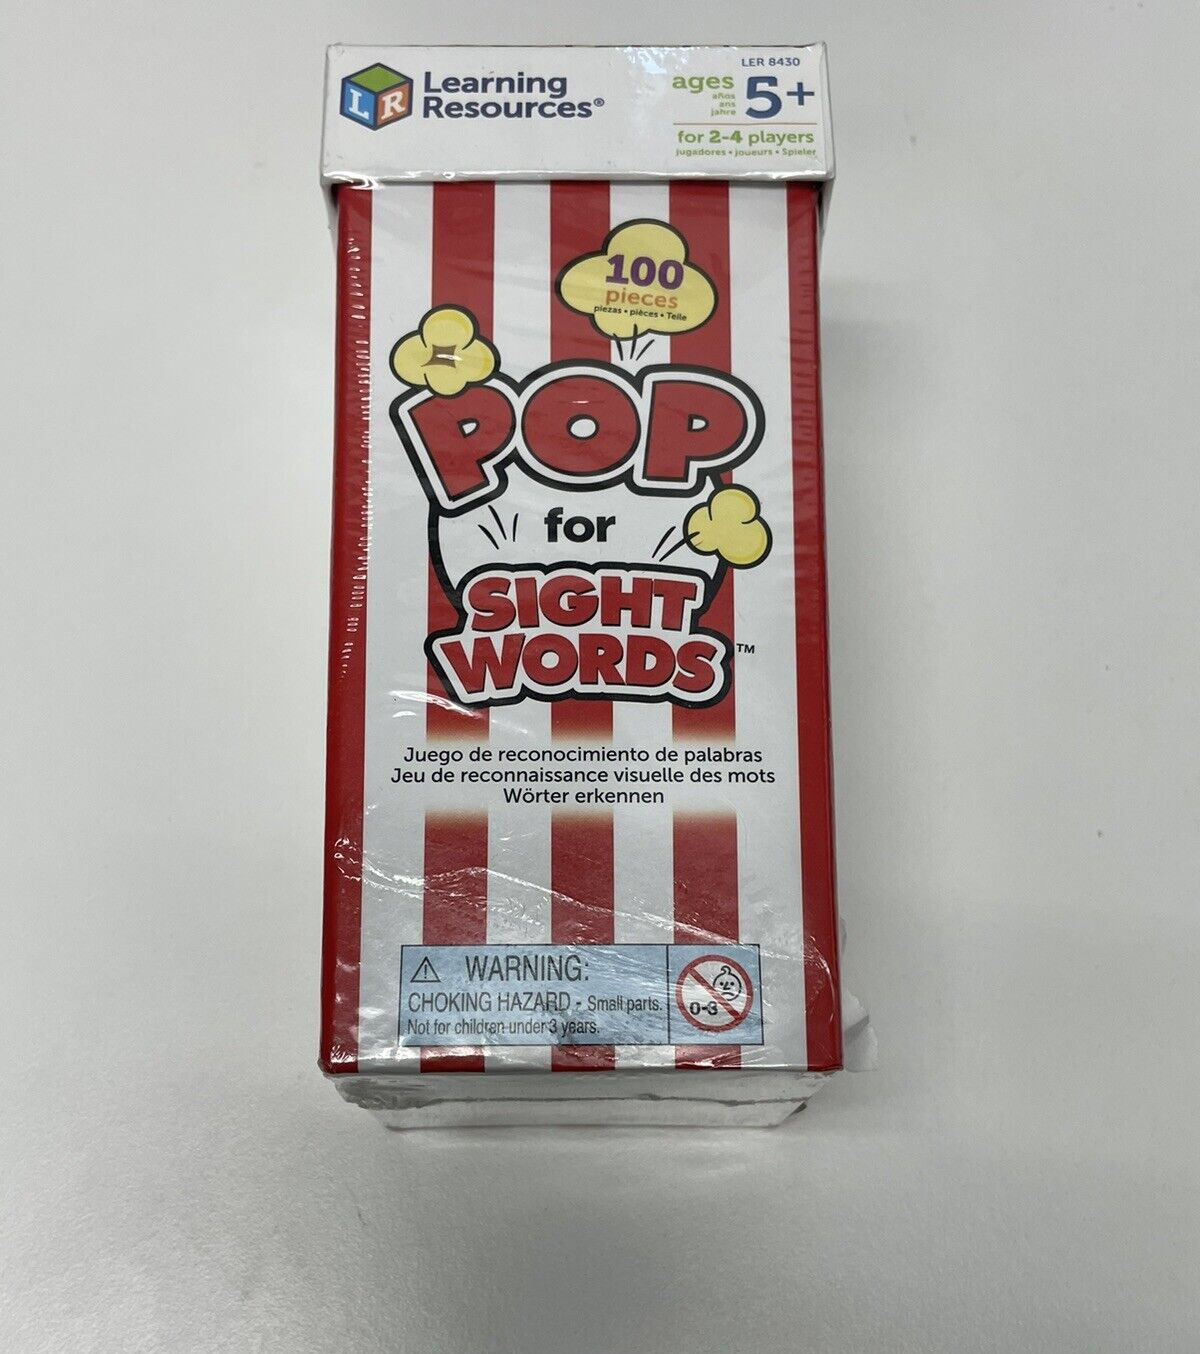 NEW Learning Resources POP for Sight Word Game 100 Popcorn Cards LER8430 SEALED